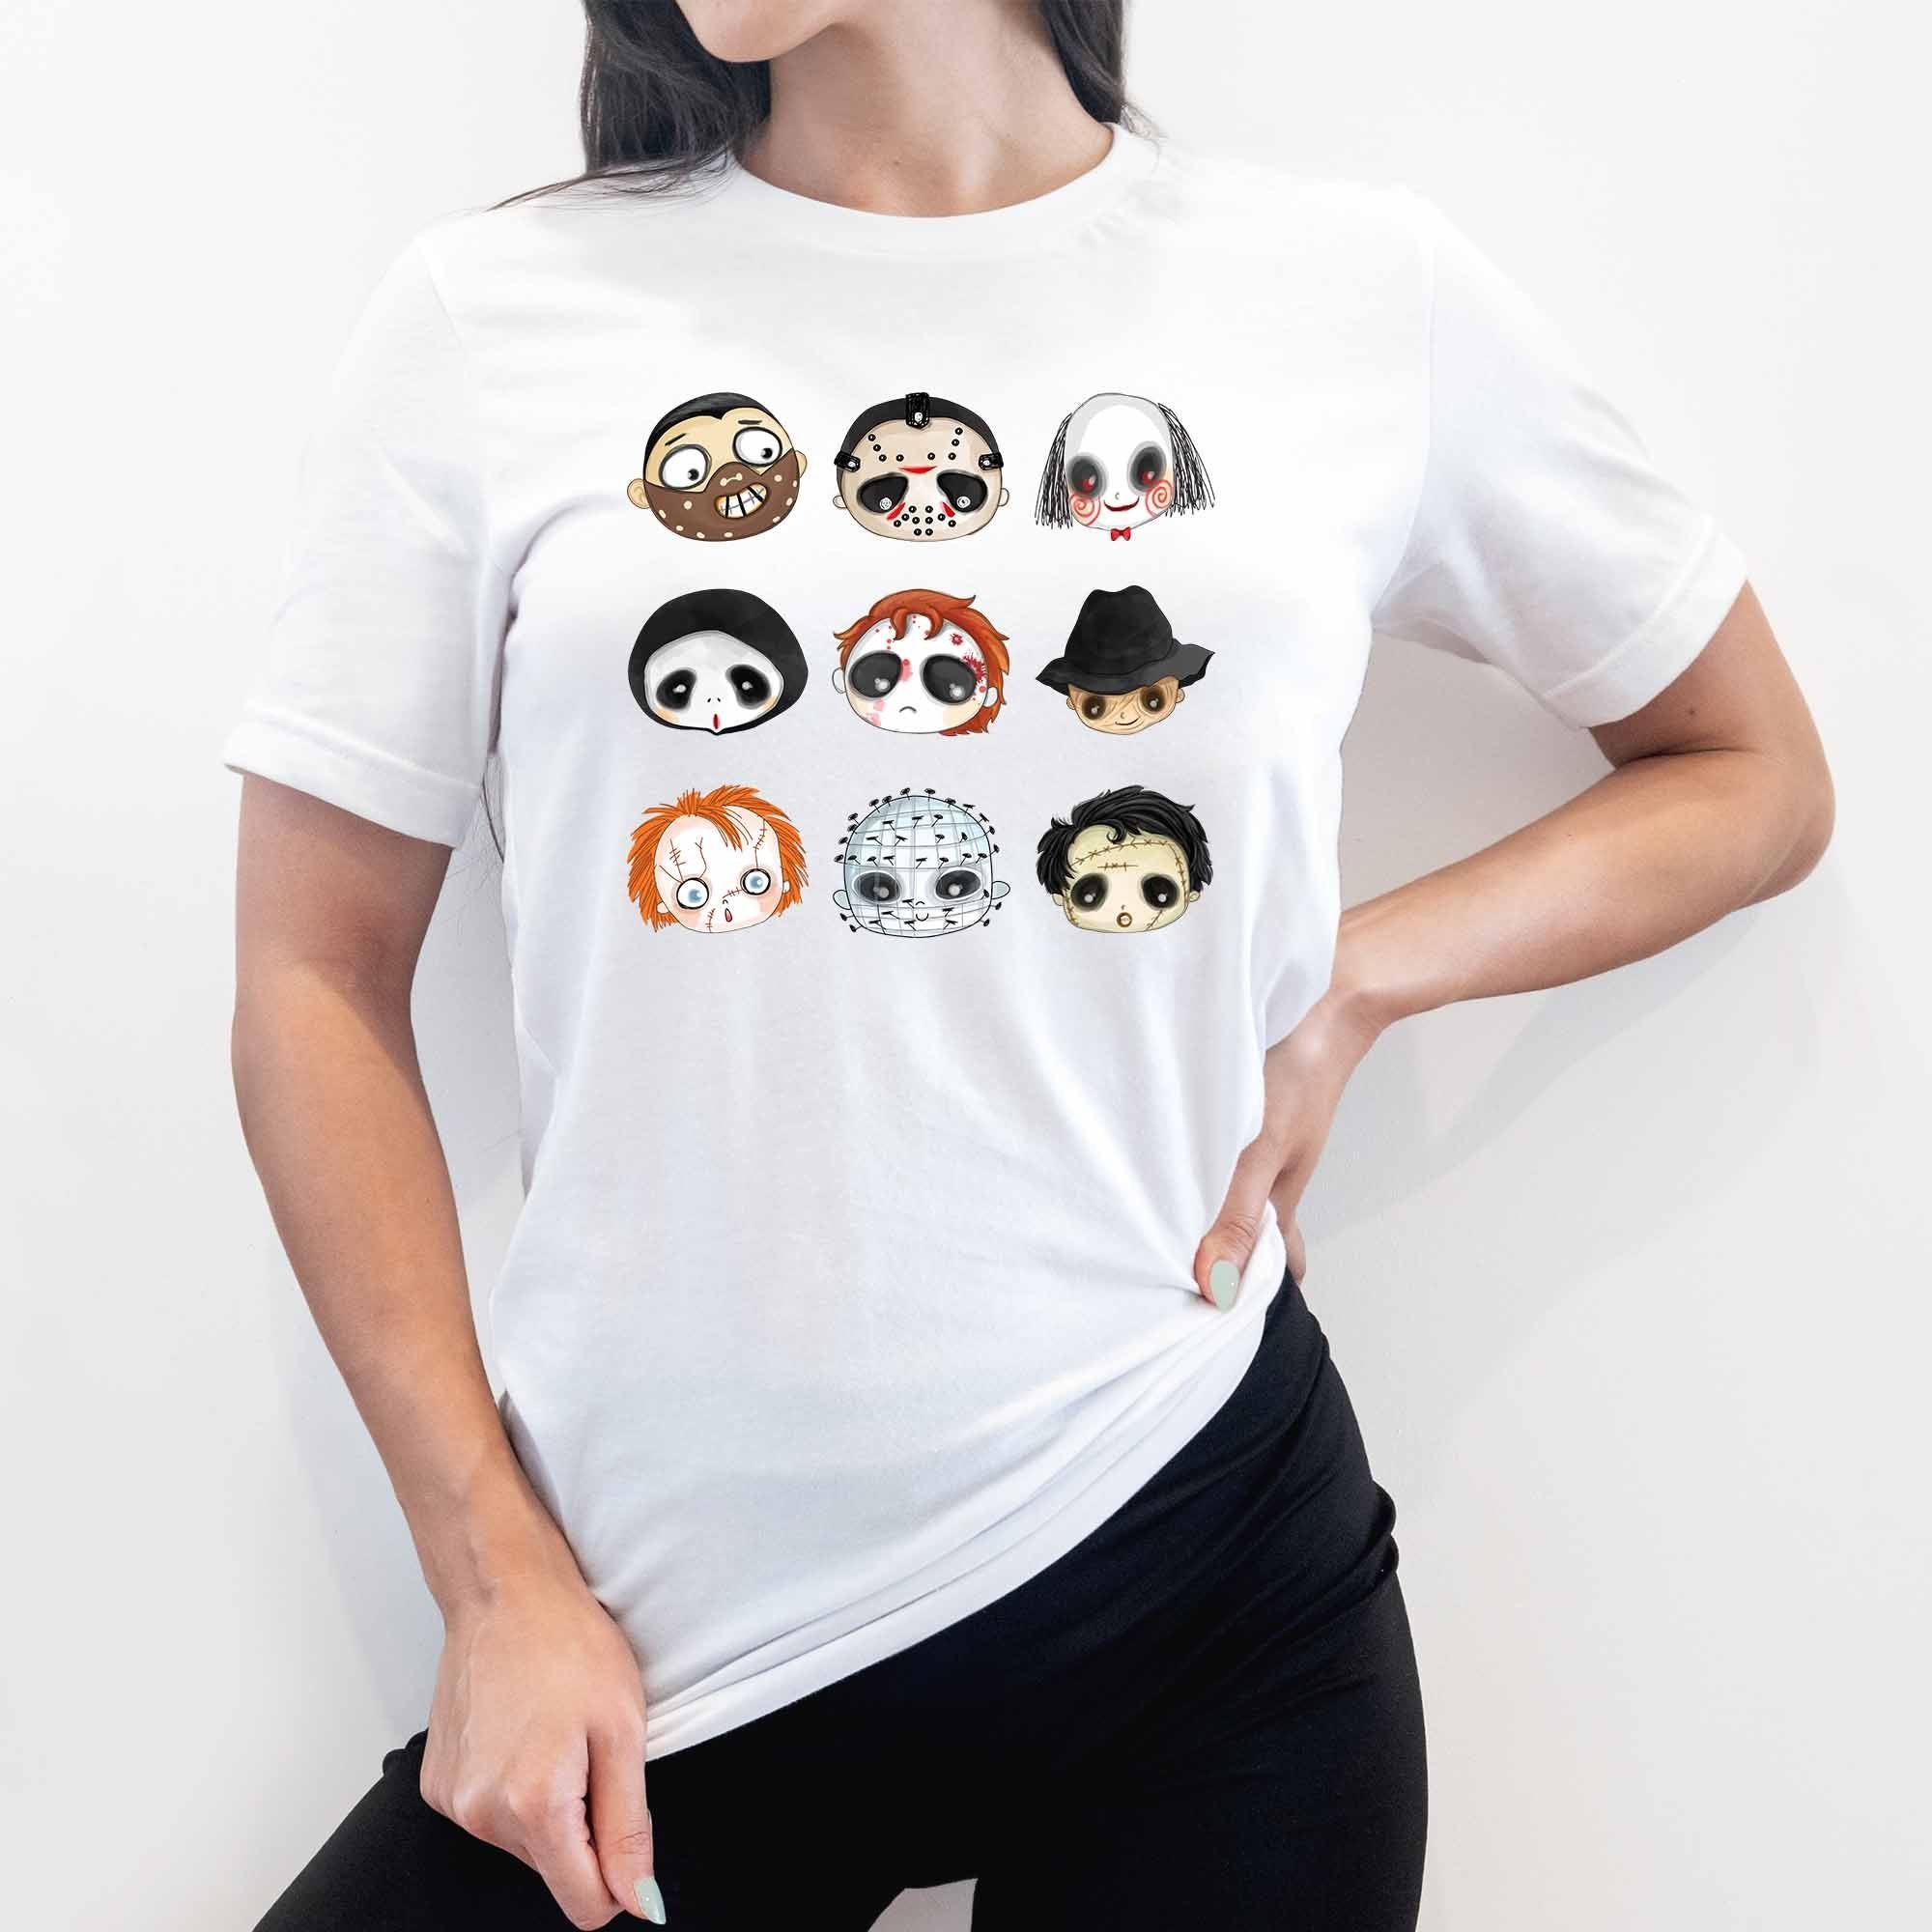 Horror Faces Graphic Tee - My Custom Tee Party